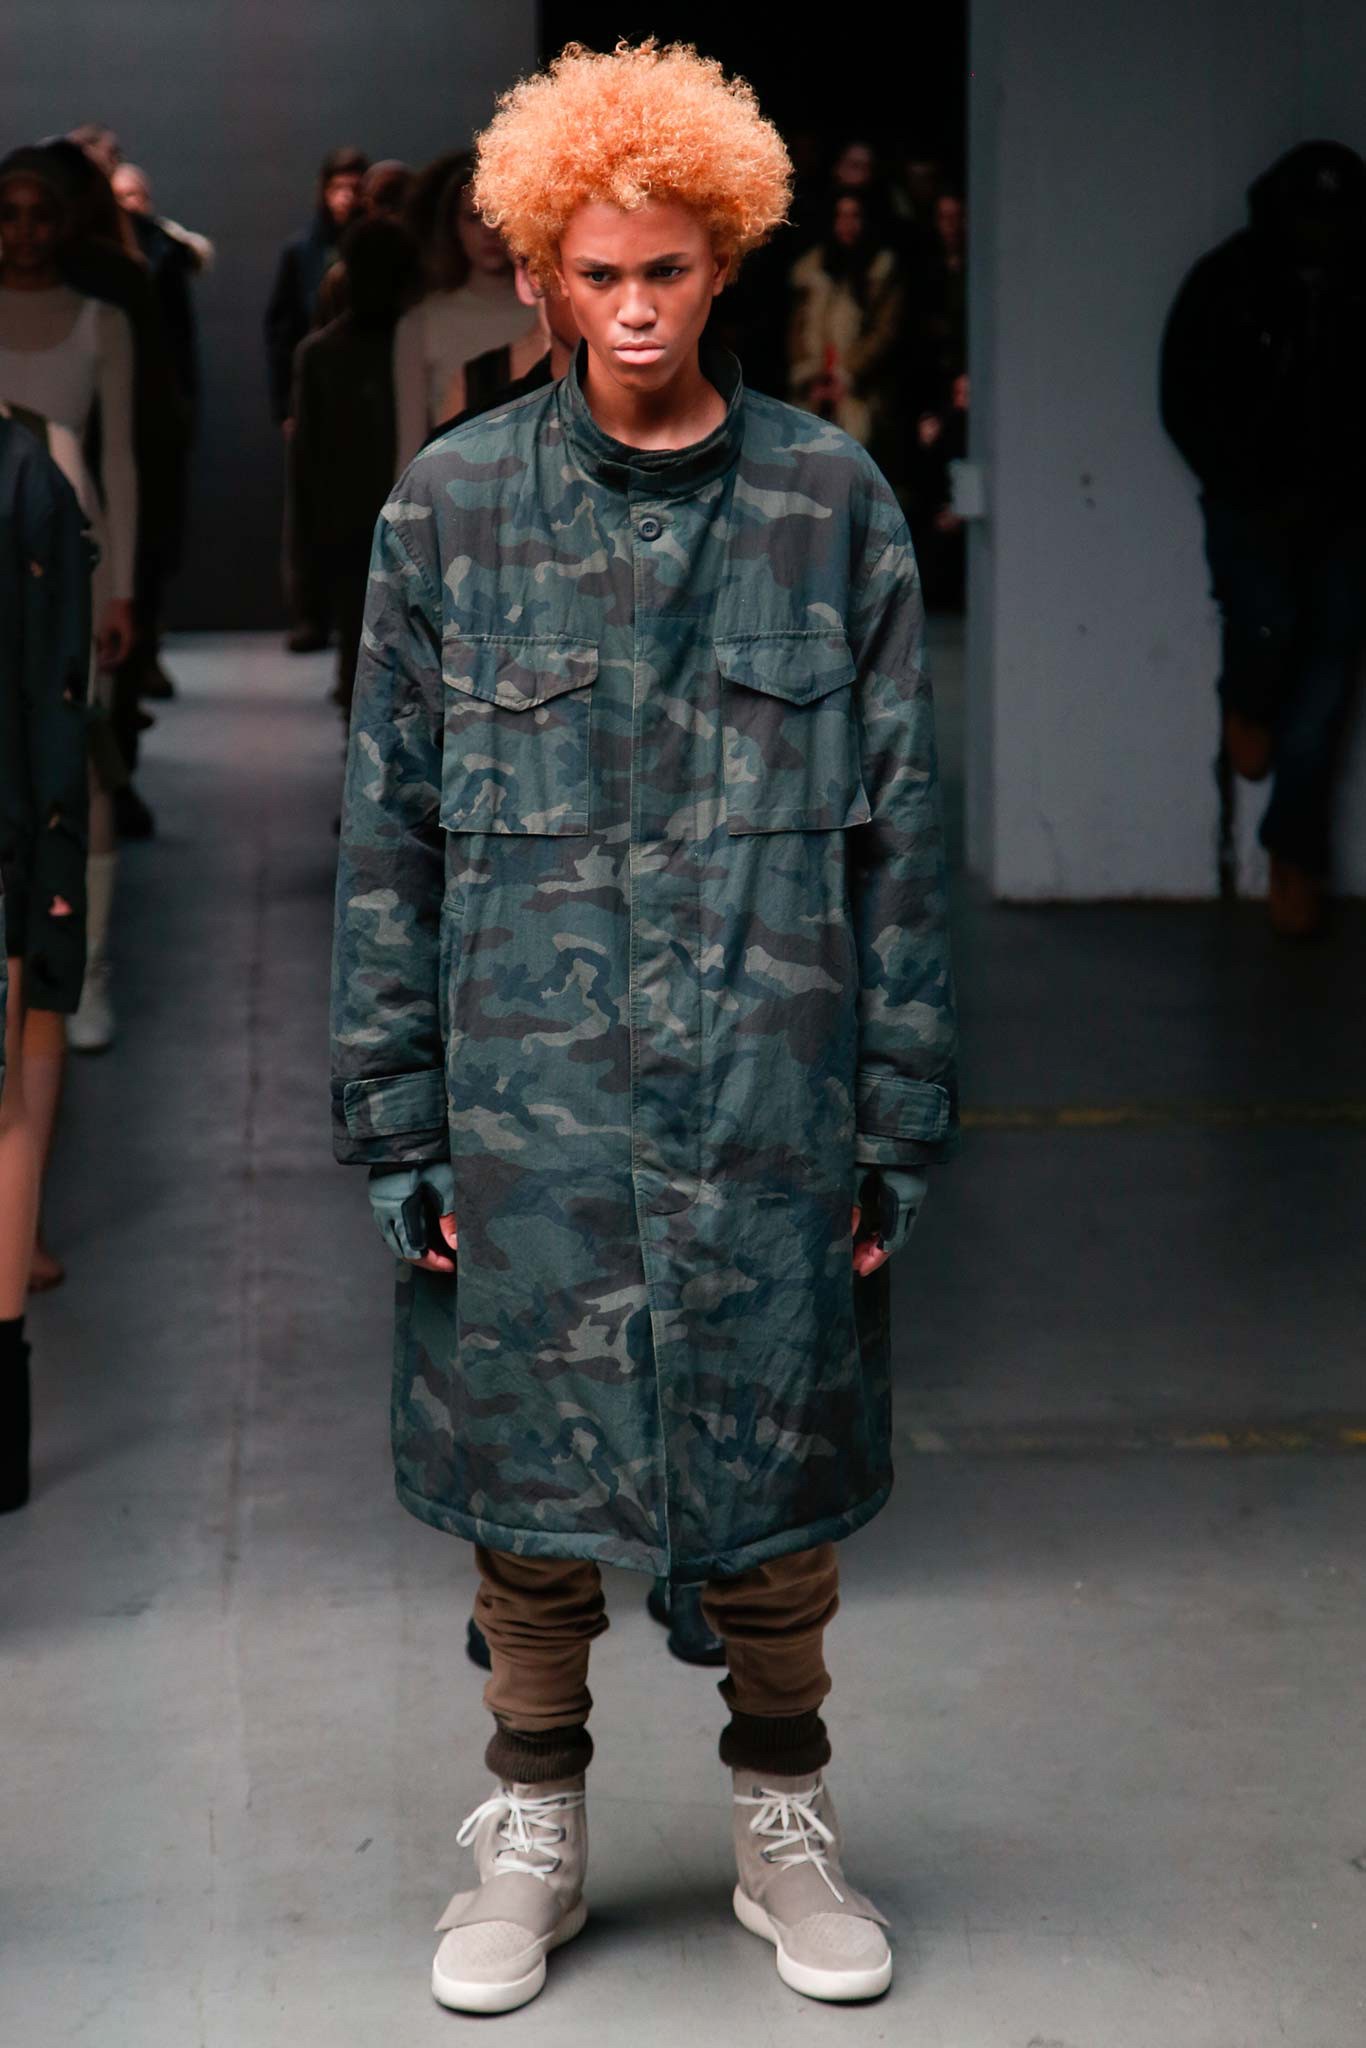 Kanye West Adidas Fall Winter 2015 Mens Collection Photos 001